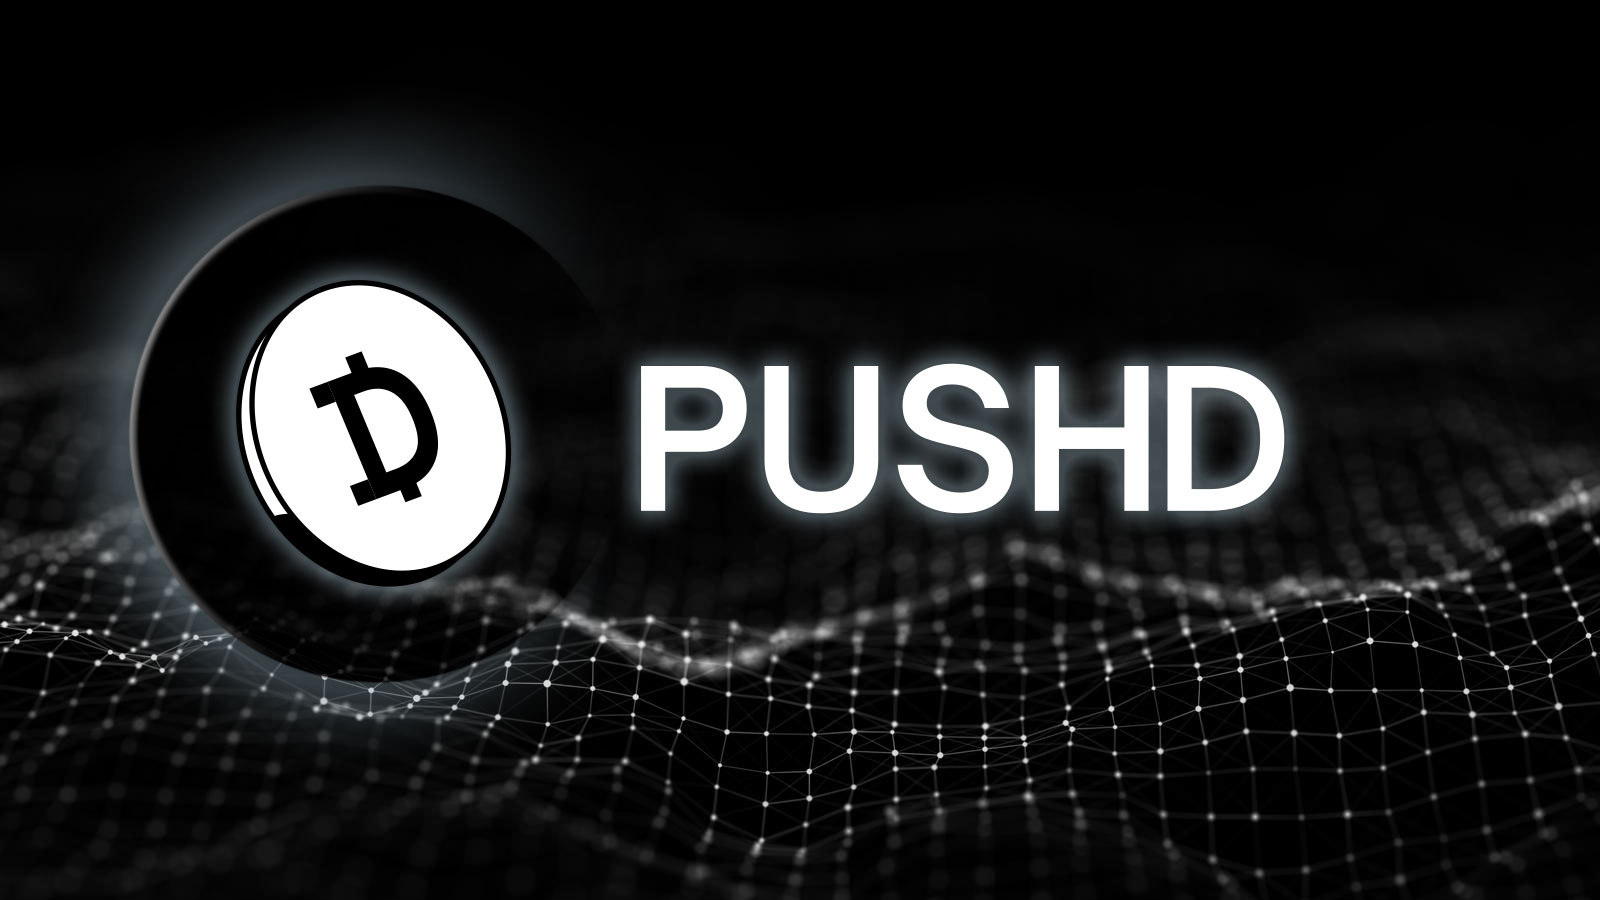 Pushd (PUSHD) Pre-Sale Welcomes Customers in January as Polygon (MATIC) and Polkadot (DOT) Communities Ready for Upgrades in 2024